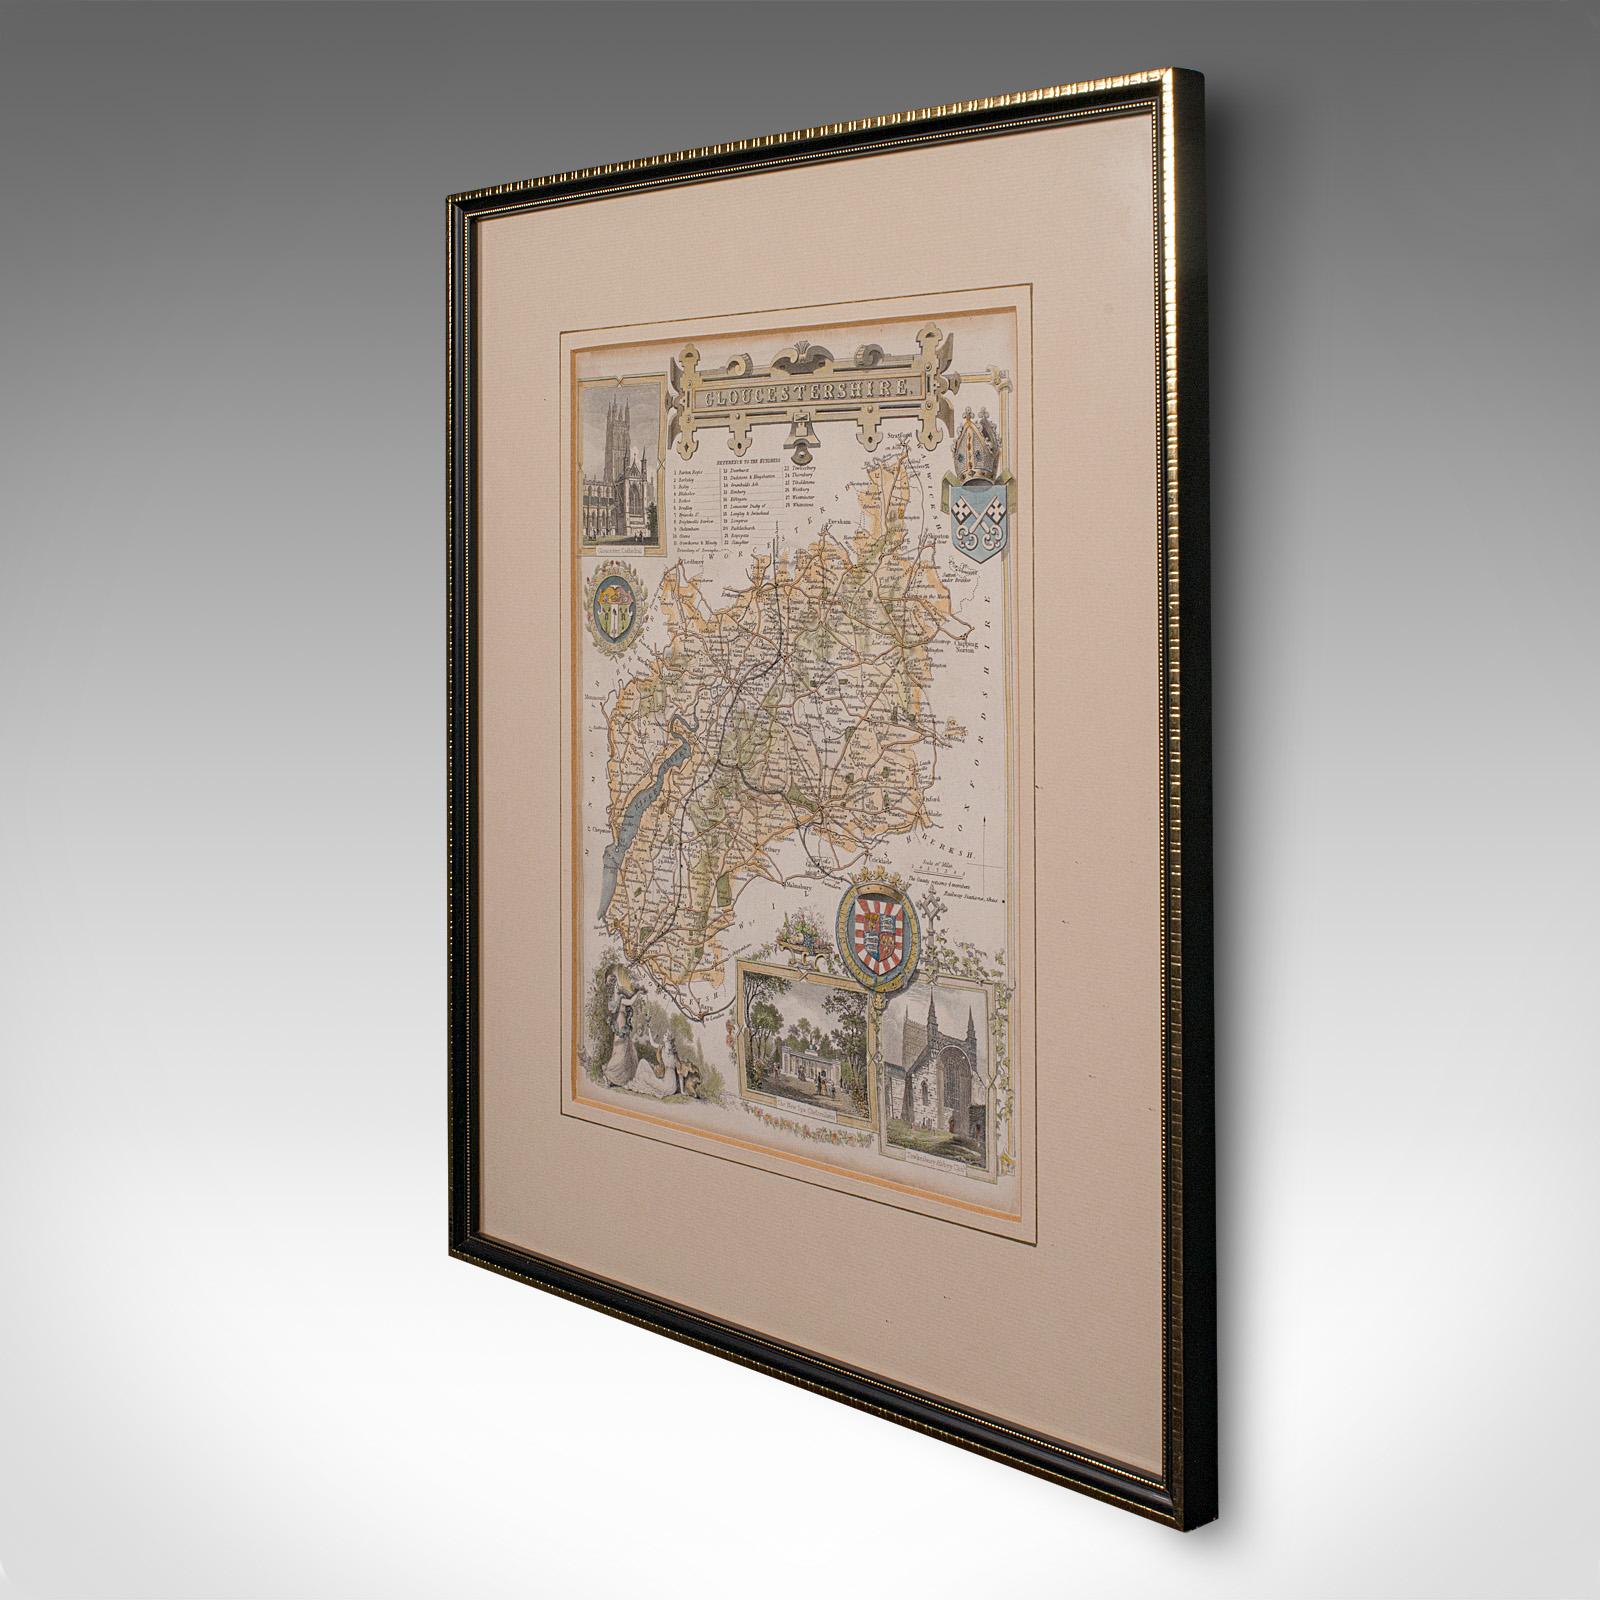 Victorian Antique Lithography Map, Gloucestershire, English, Framed Engraving, Cartography For Sale